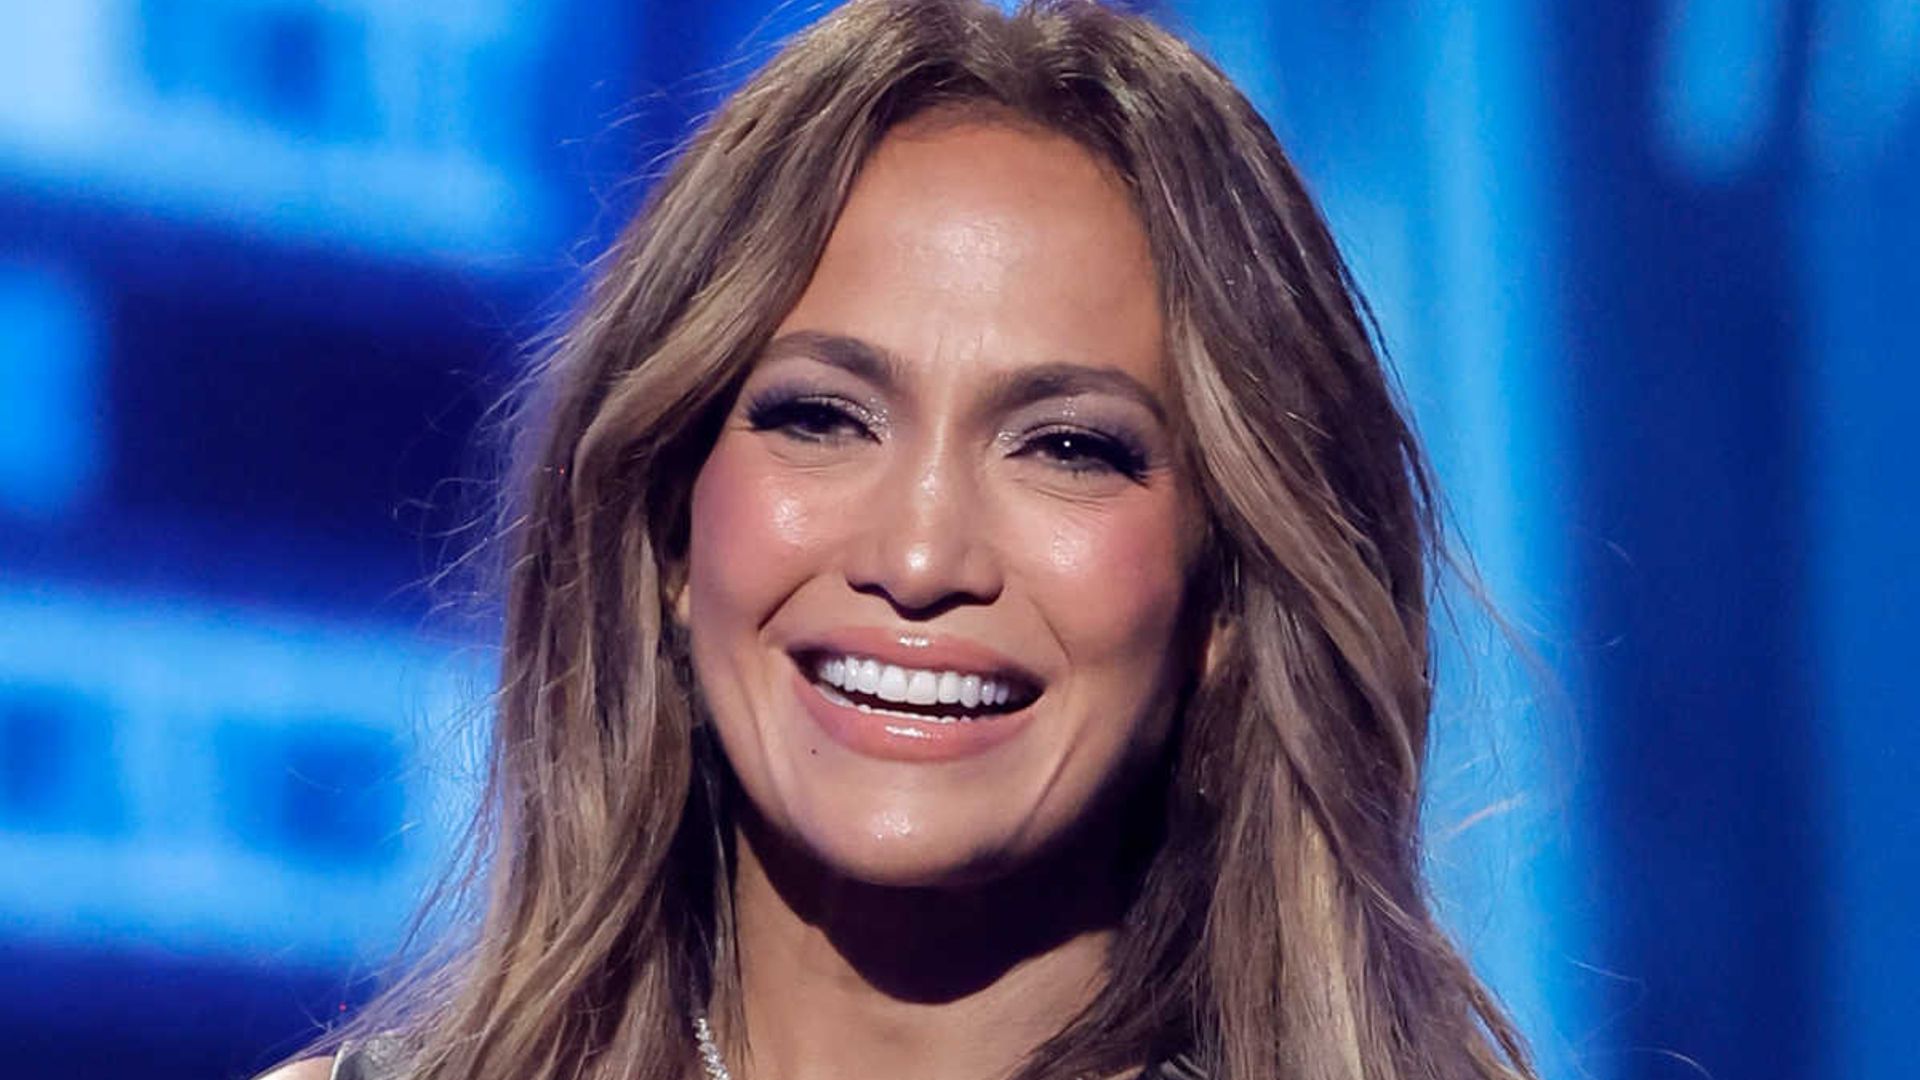 JLo’s eyelash curler is her secret beauty weapon – and it’s shockingly affordable